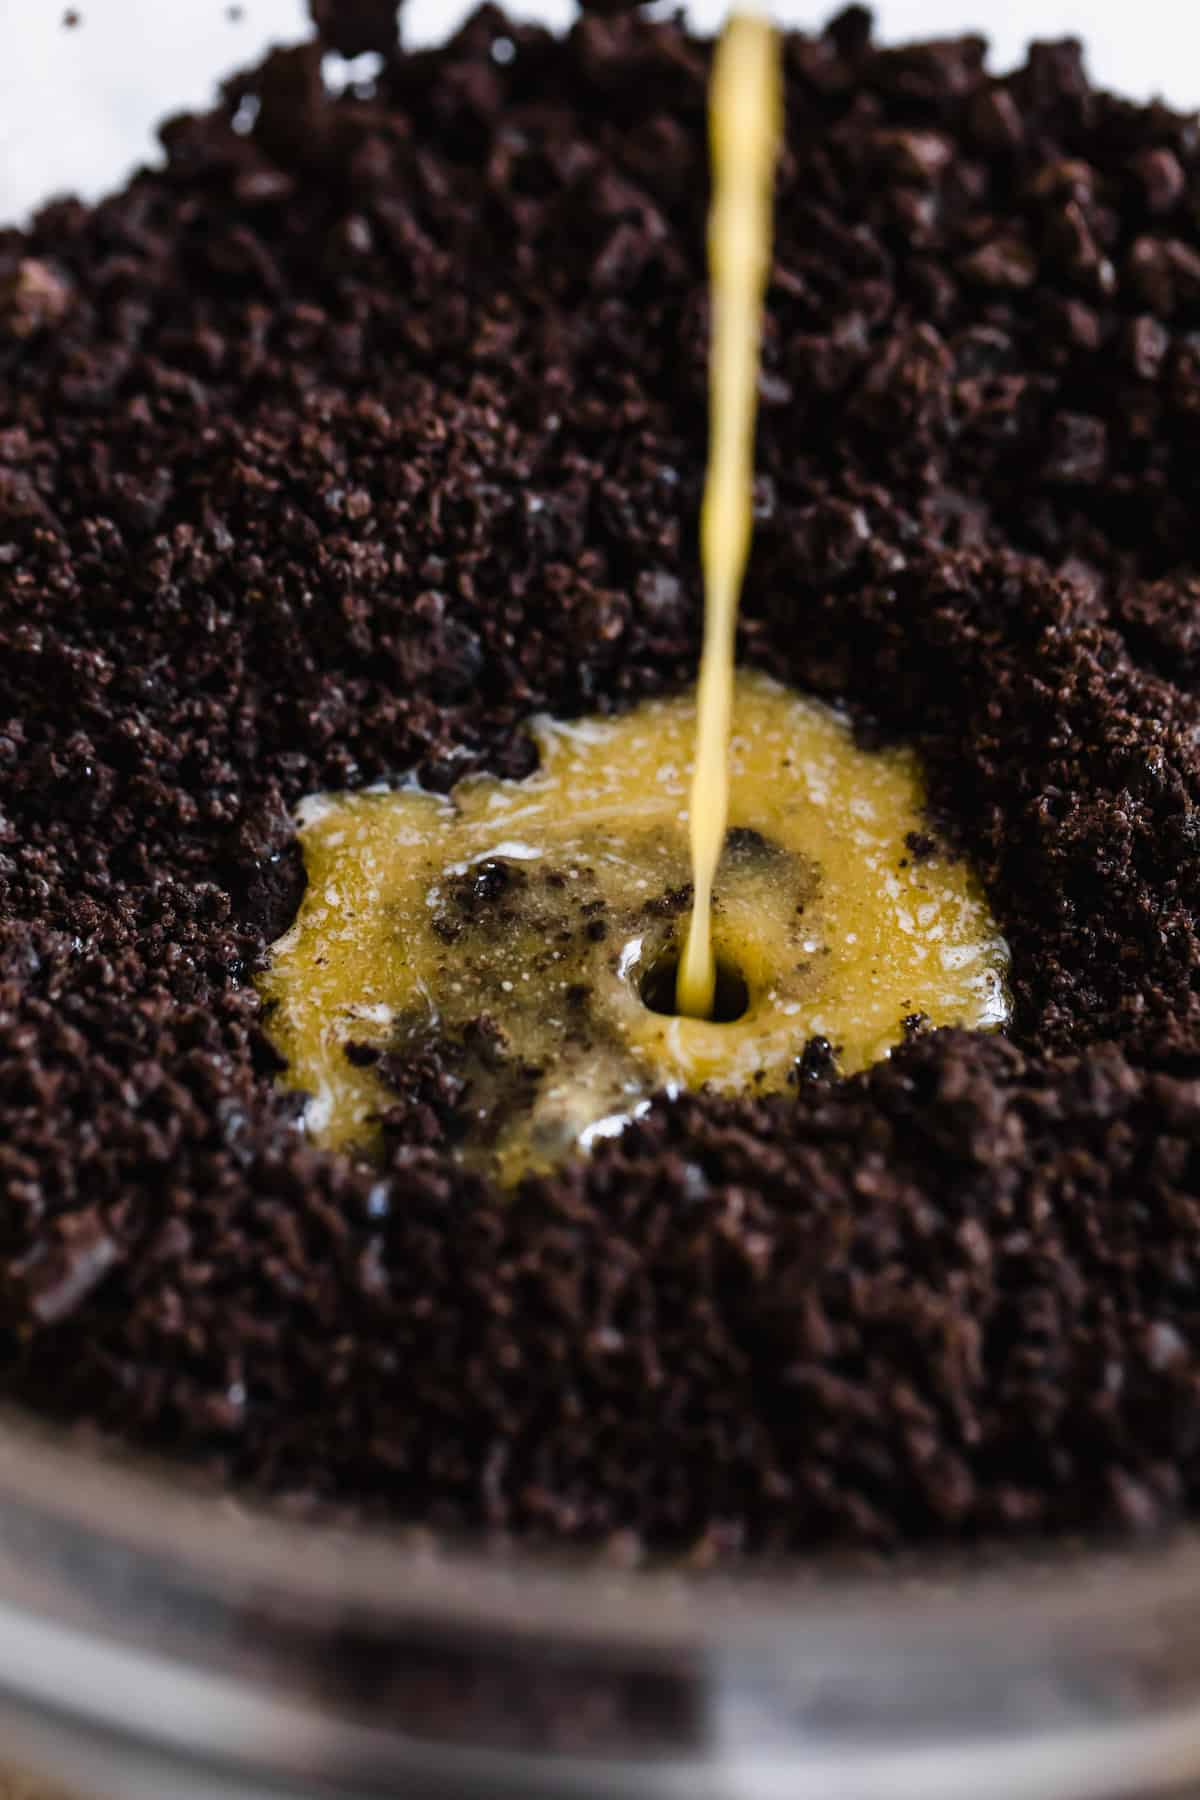 Melted Butter Being Poured into a Bowl of Oreo Cookie Crumbs